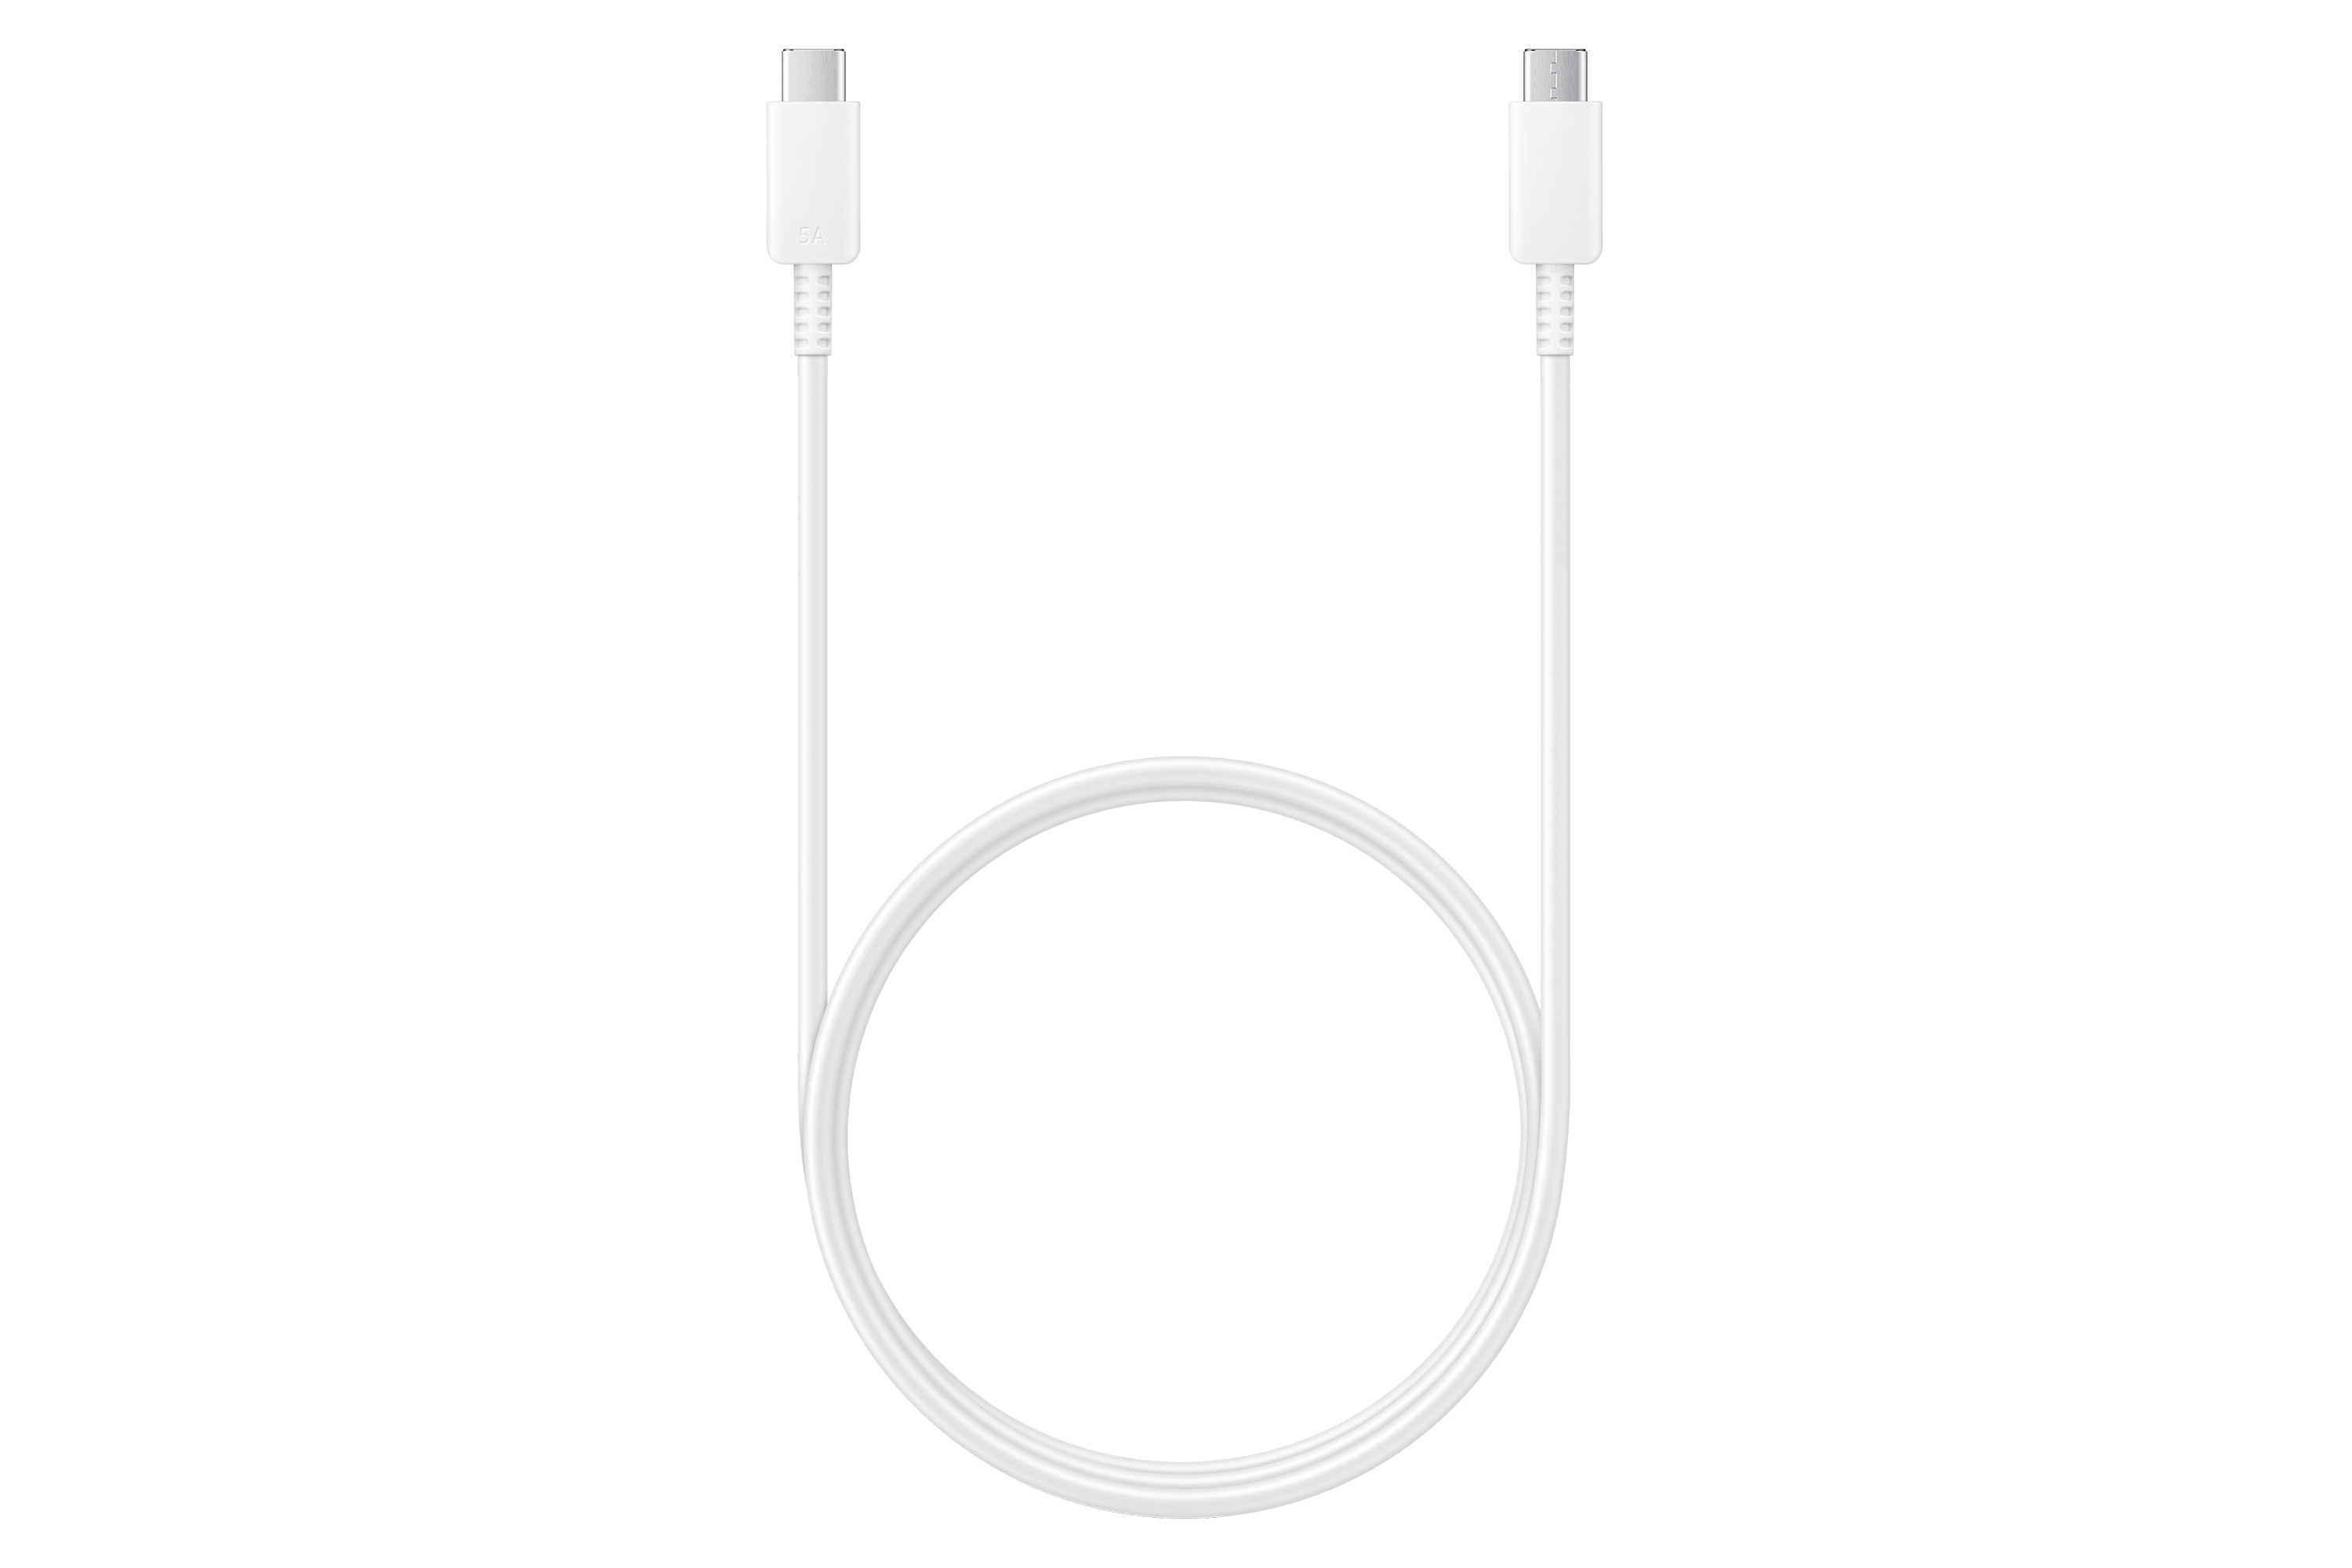 Samsung USB Type-C to USB-C 5A Cable 1m - White